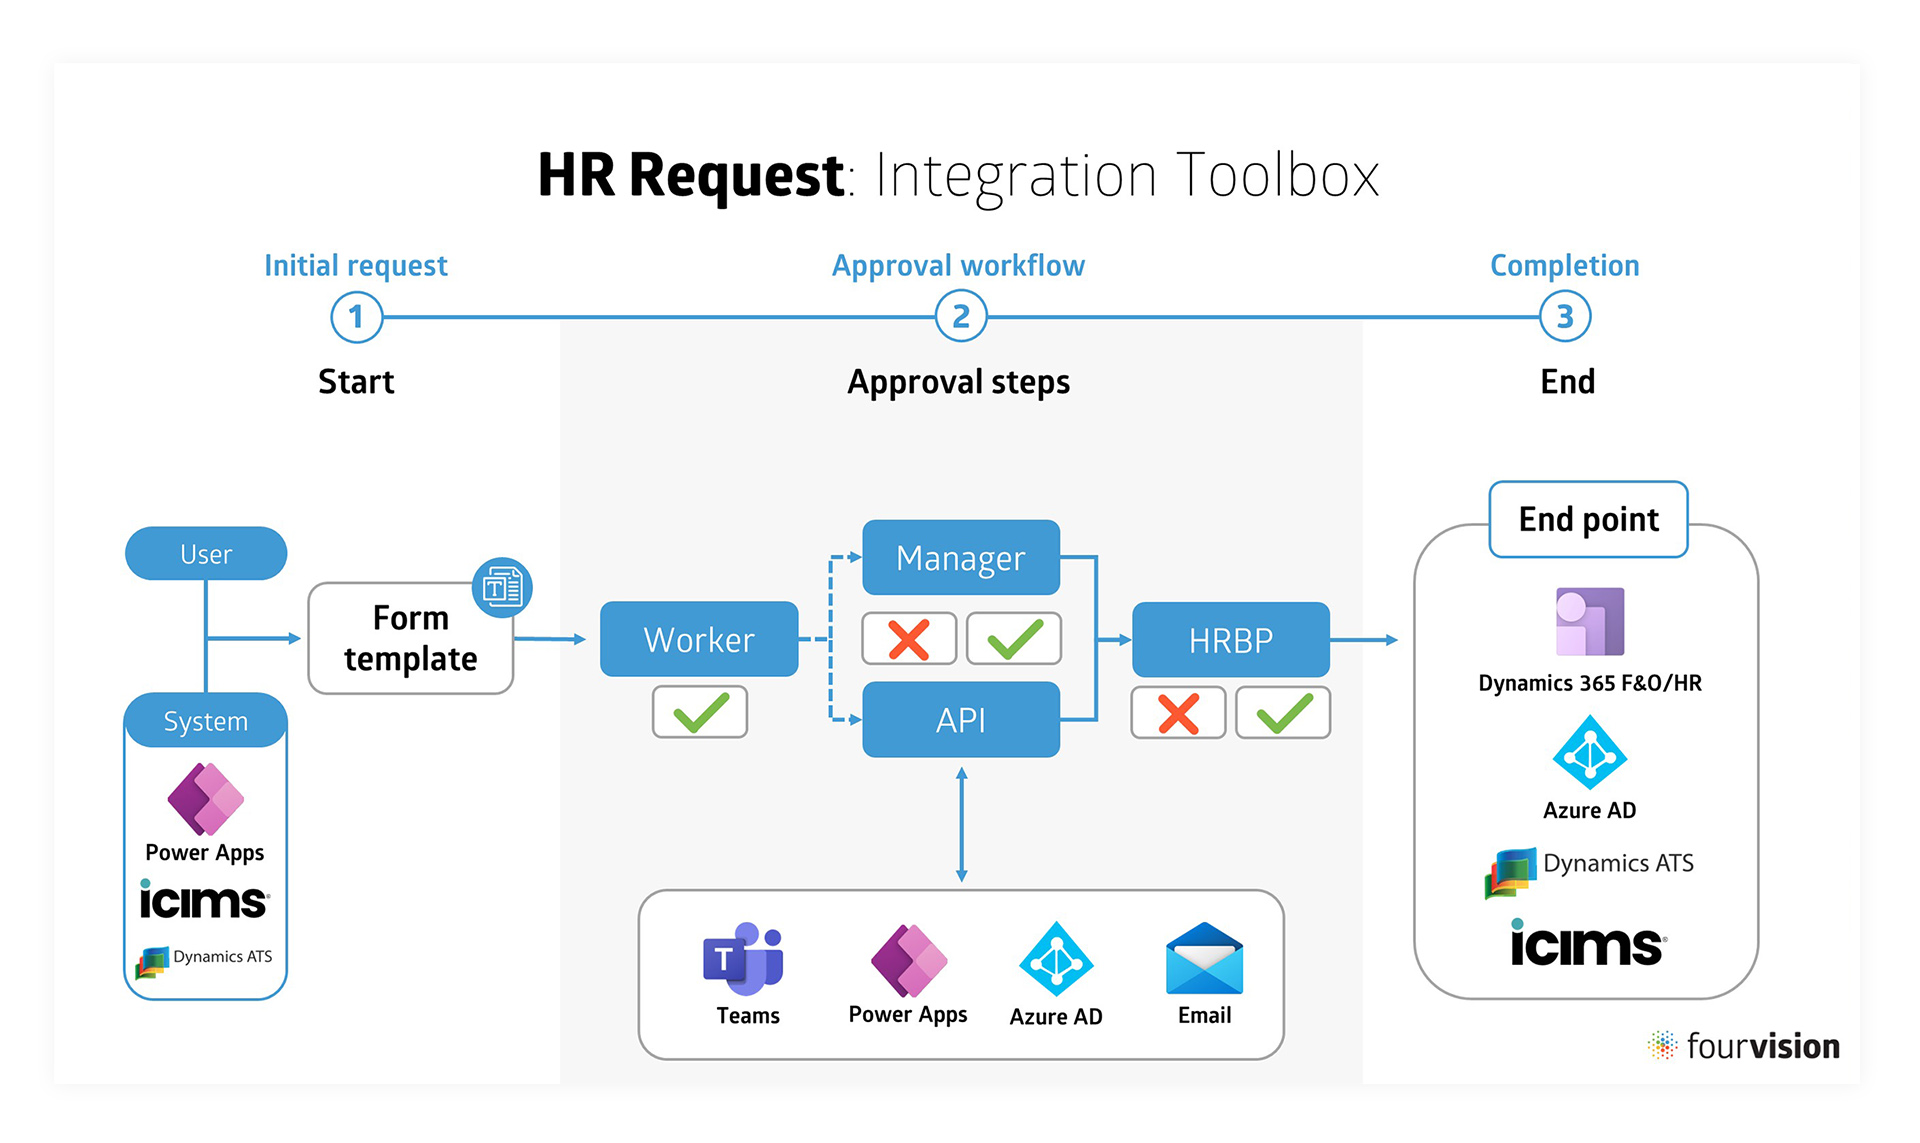 FourVision HR Request API integration toolbox model of HR approval workflow